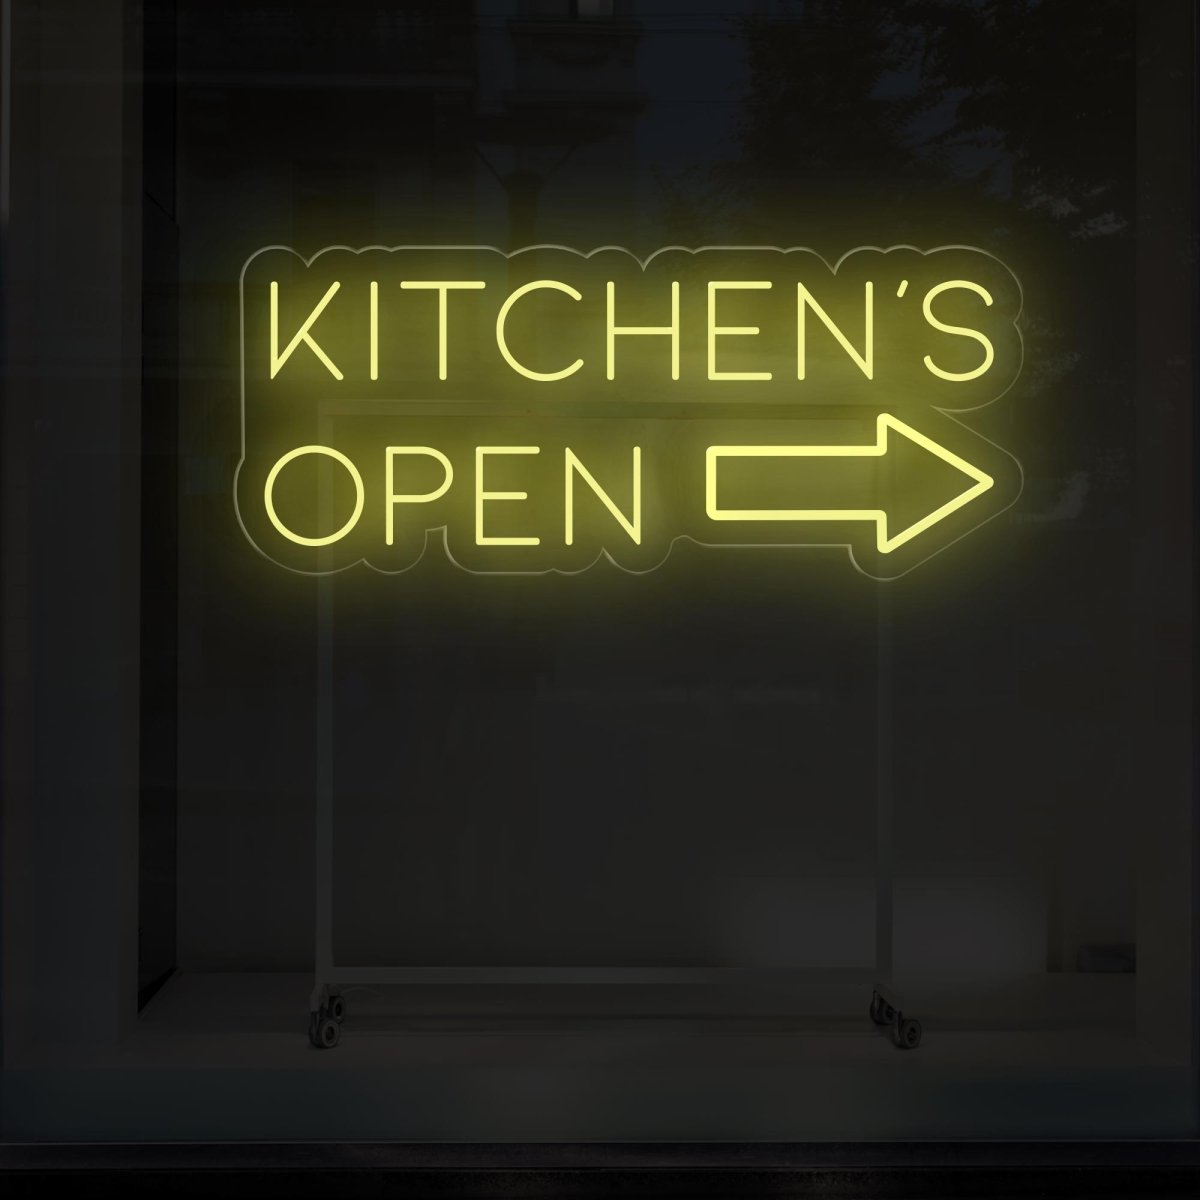 Kitchen's Open LED Neon Sign - Illuminate Your Space - NEONXPERT